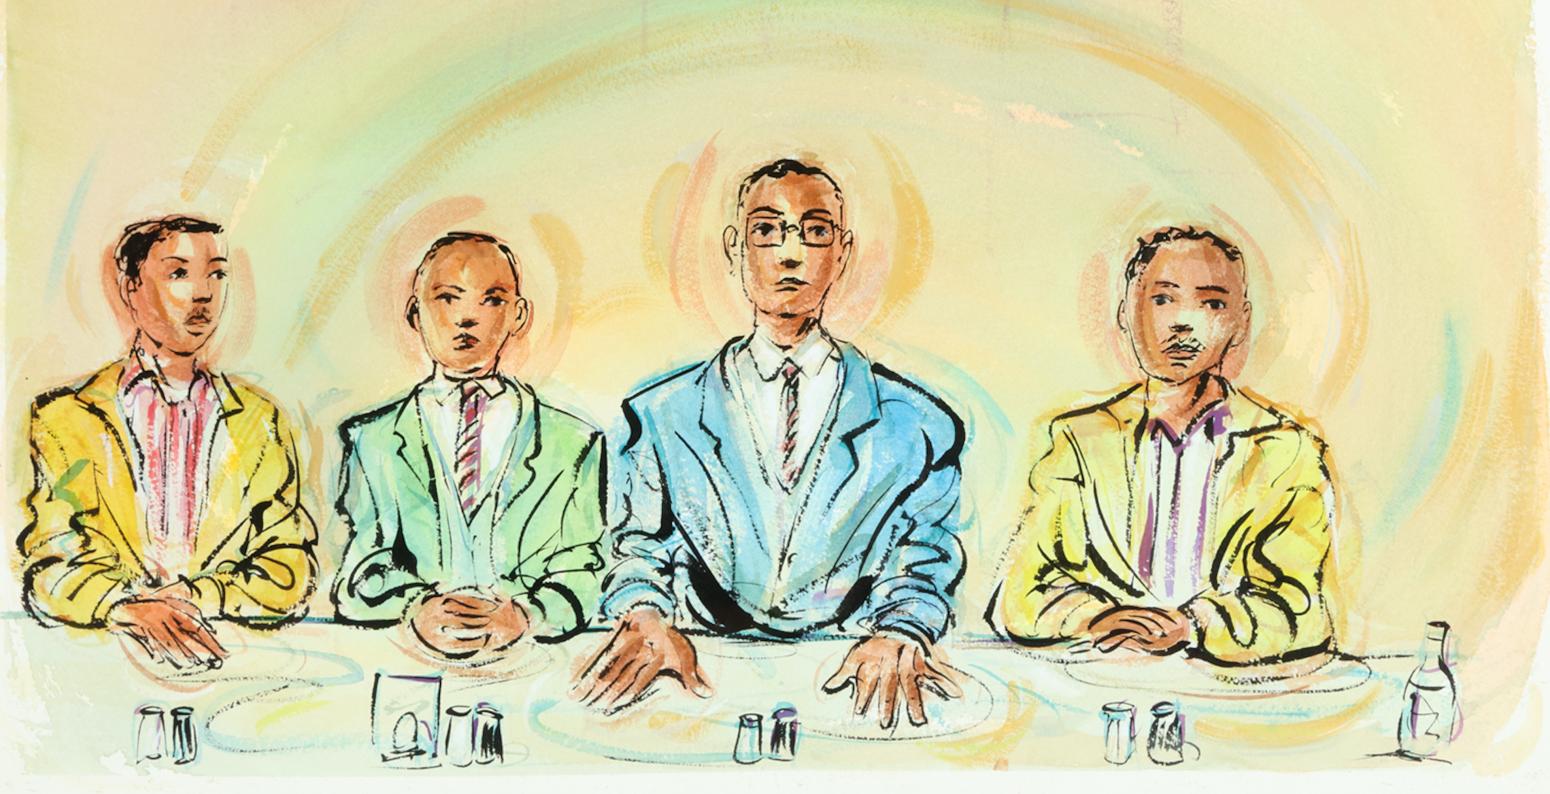 Four Black men seated at a diner counter, looking straight ahead.